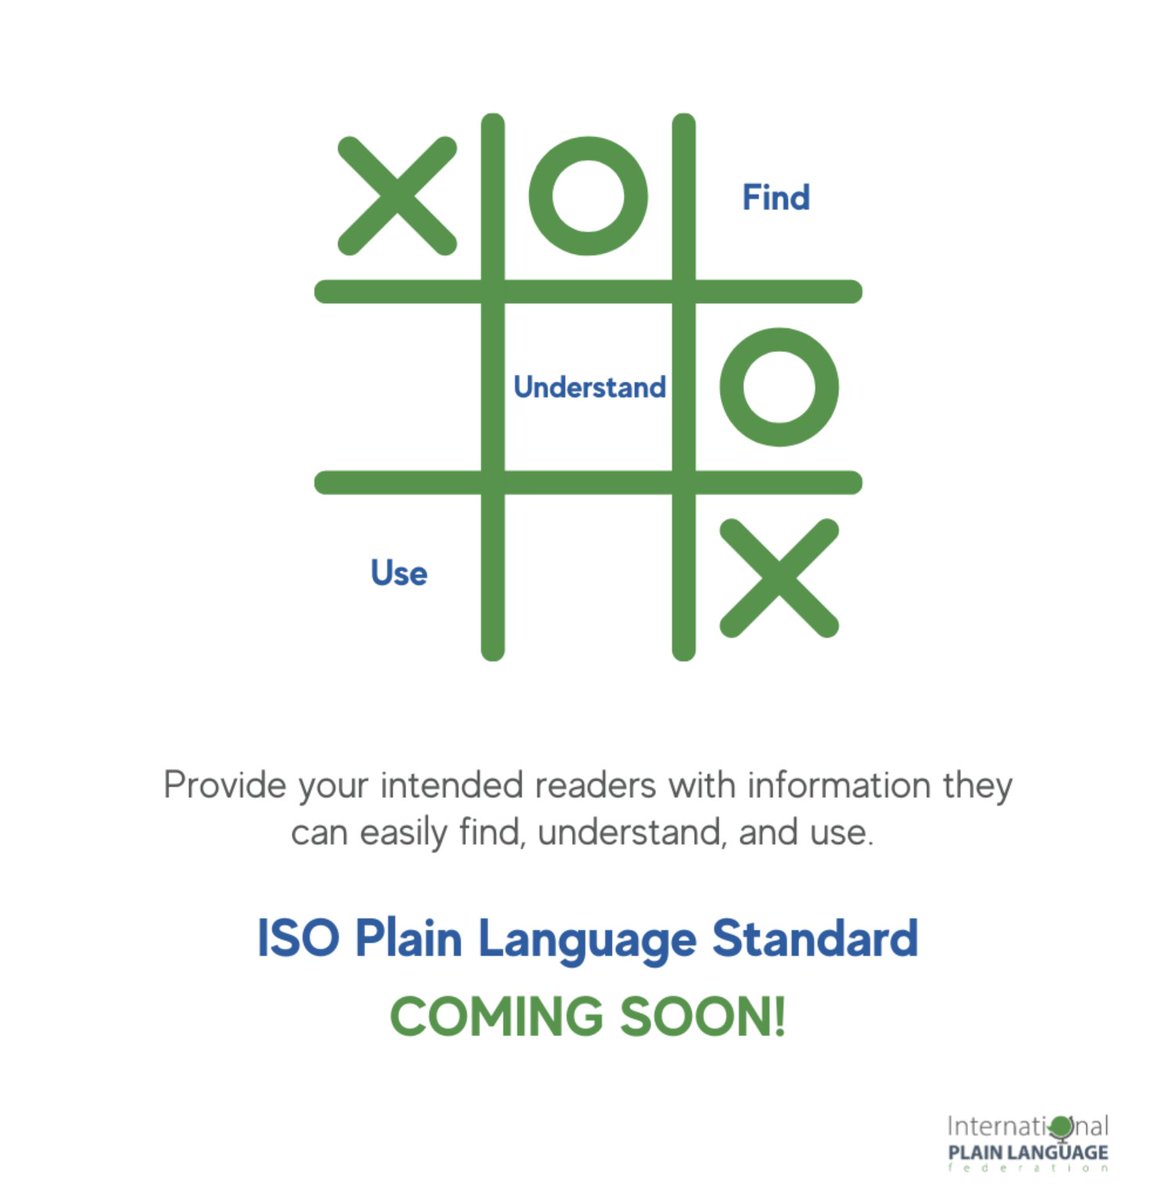 Coming soon! The first ISO Plain Language Standard will help all communicators provide their intended readers with the information they can easily find, understand, and use.

#PlainLanguage #Standard #accessibility #a11y